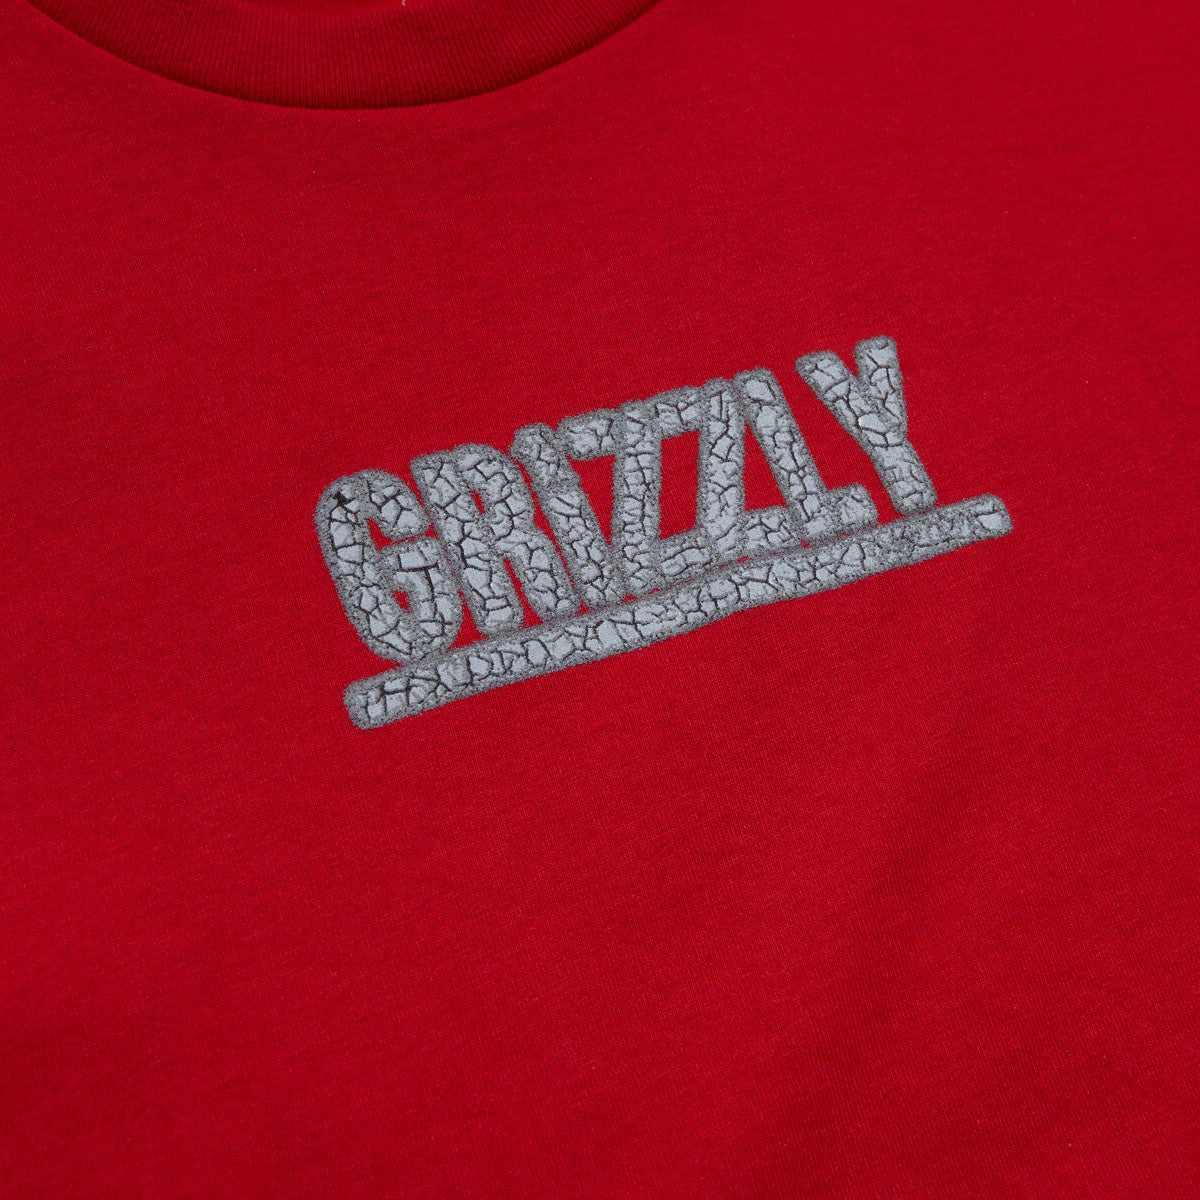 Grizzly Asphalt T-Shirt - Red image 2